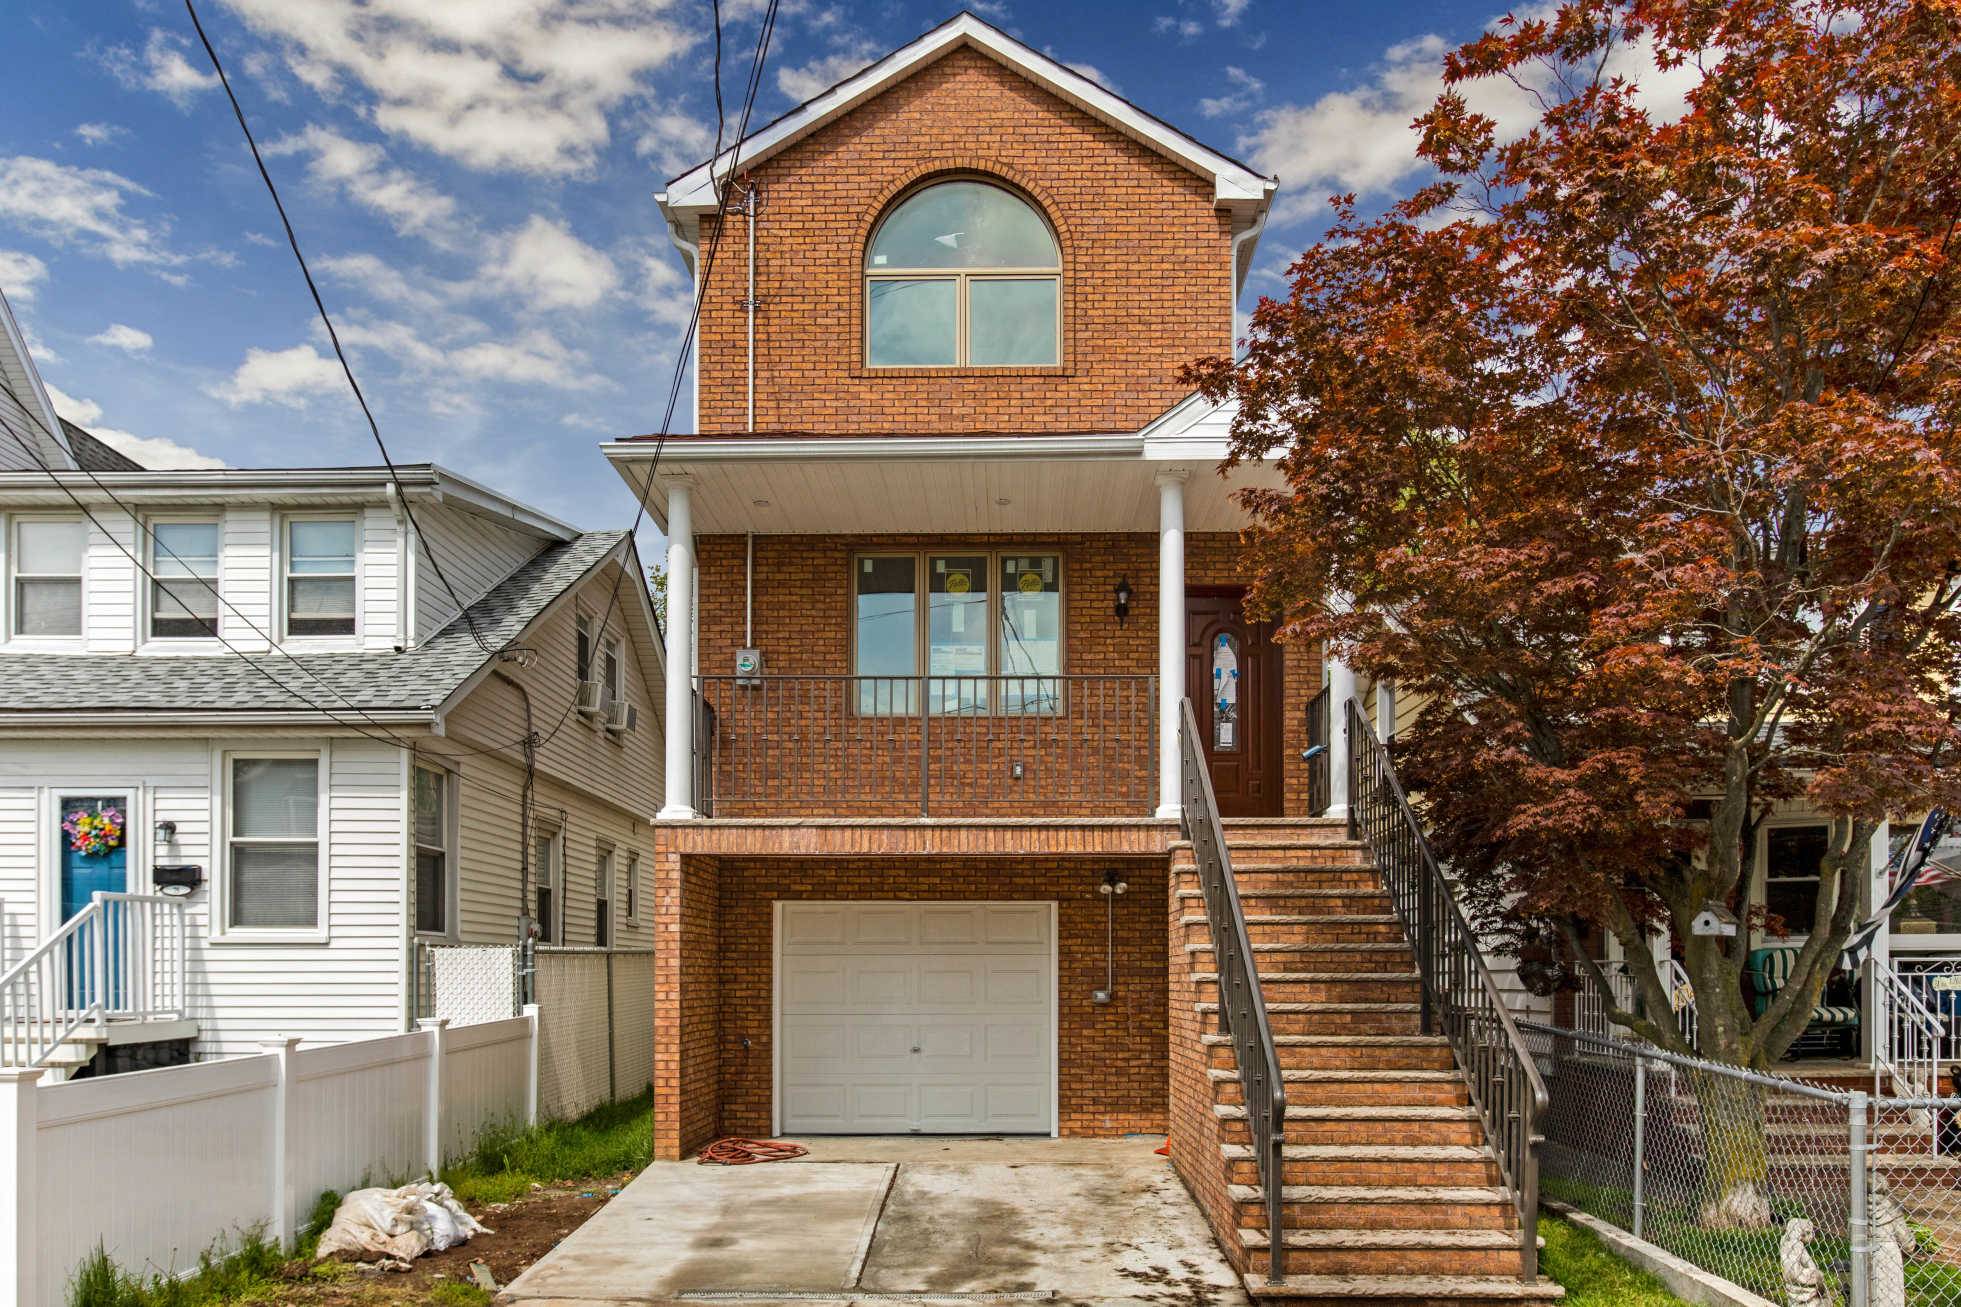 Beautiful Single Family Detached home conveniently located near Hylan Blvd.